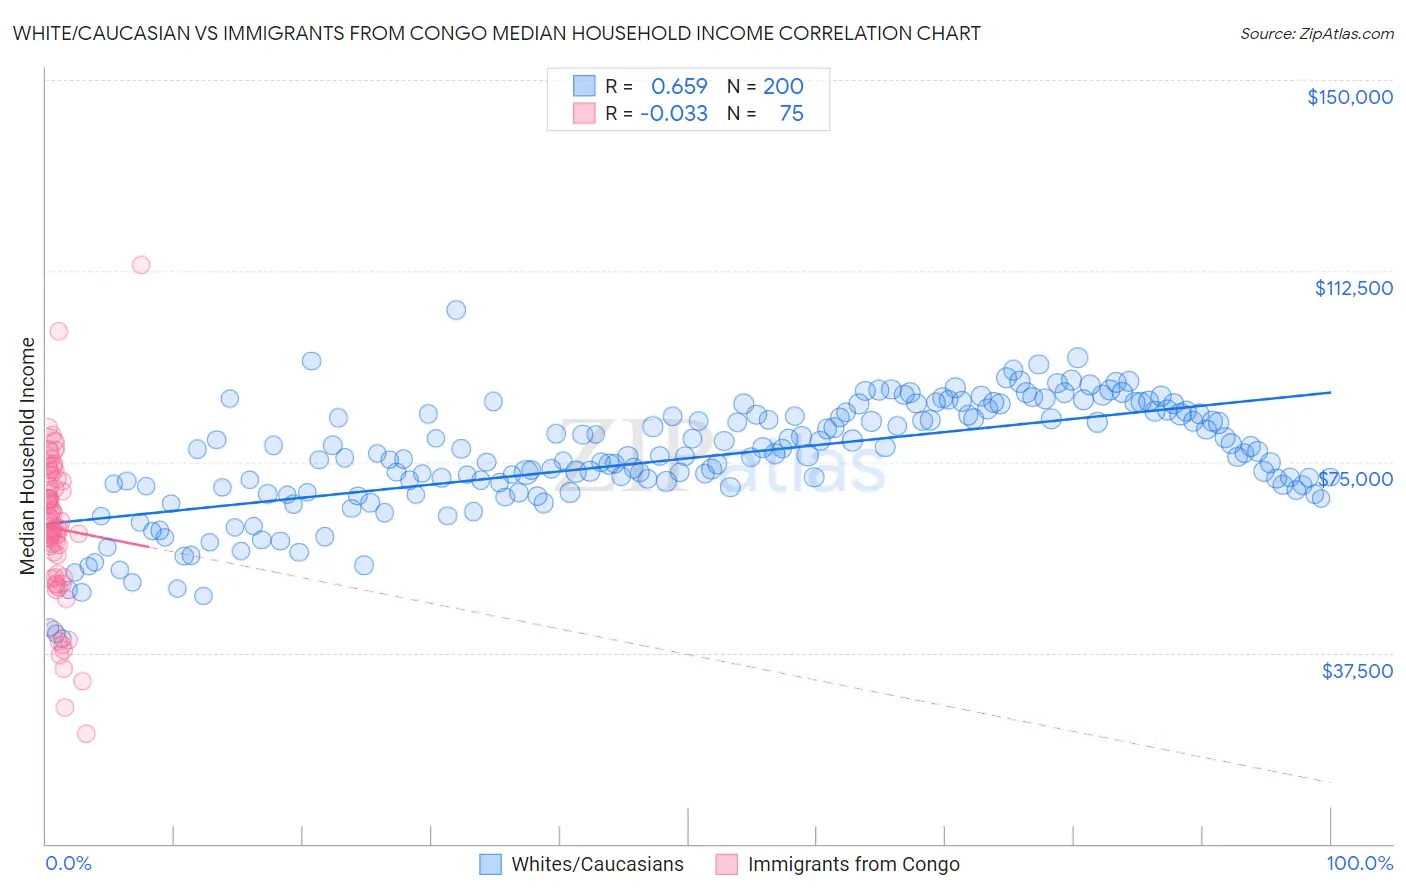 White/Caucasian vs Immigrants from Congo Median Household Income